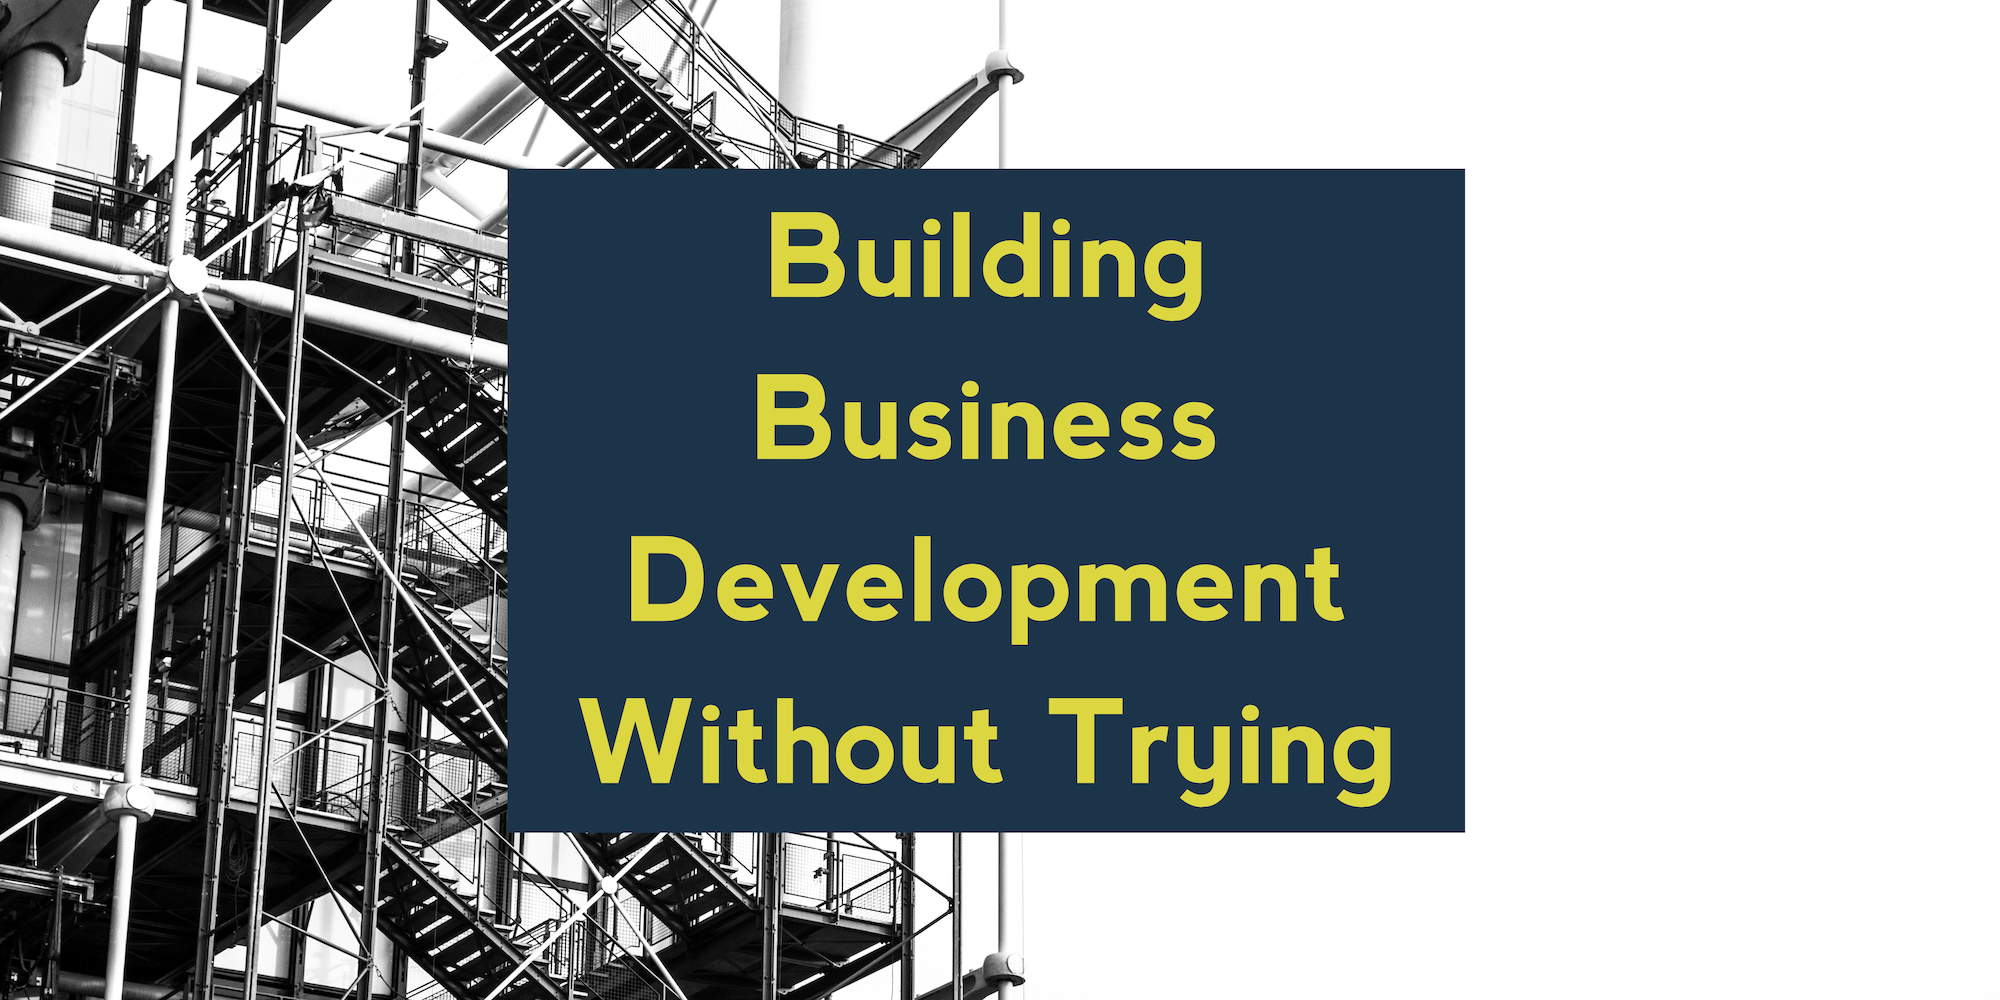 Building Business Development Without Trying